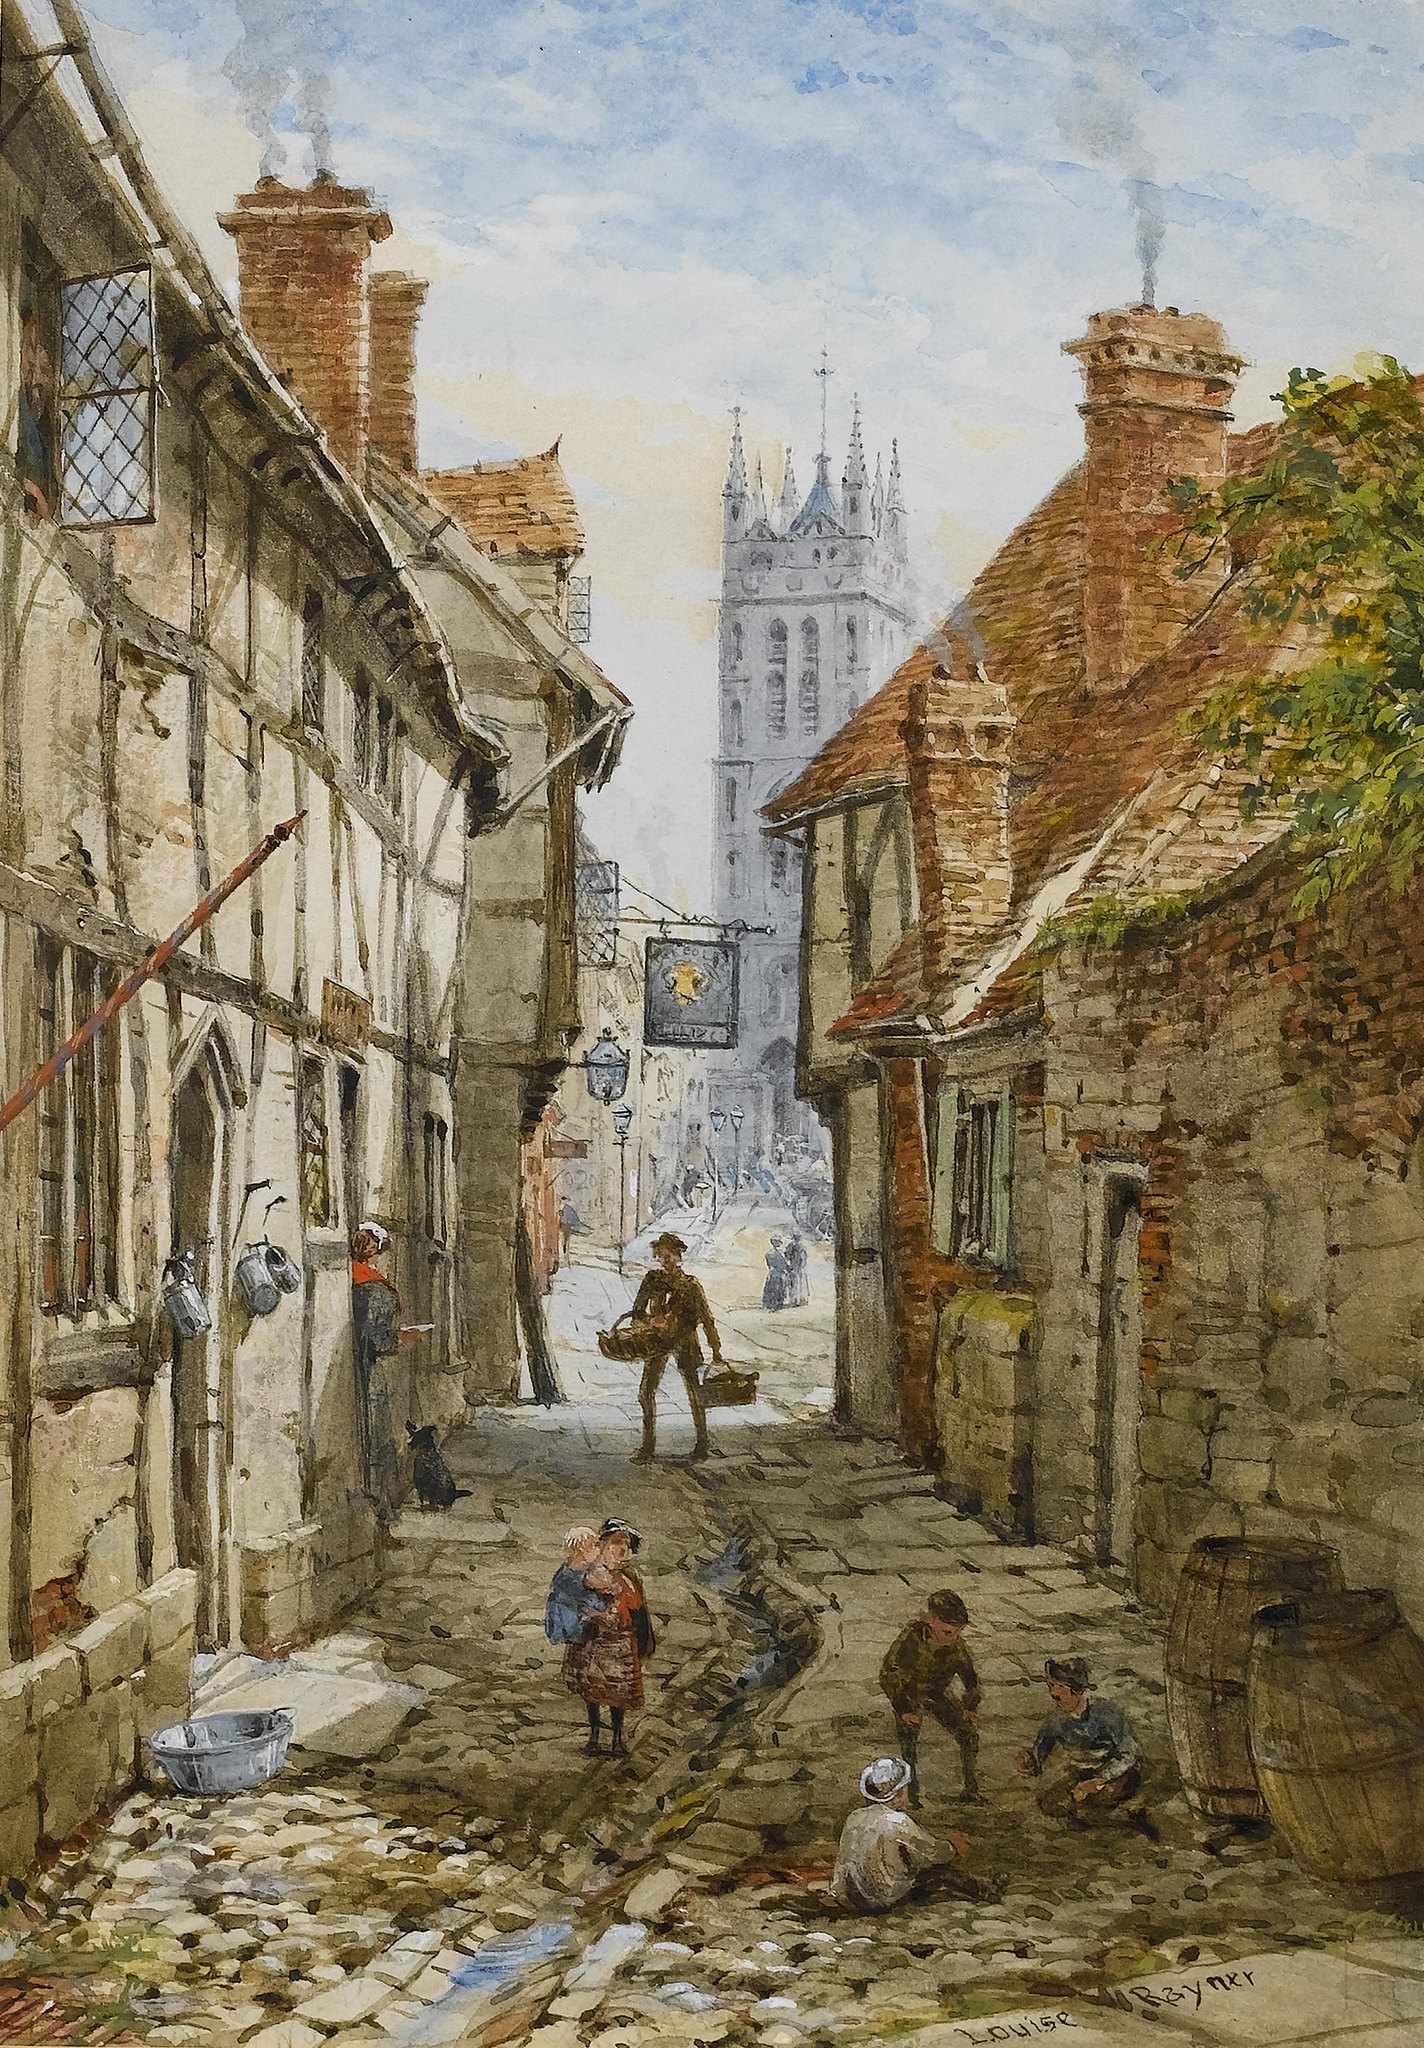 St Mary's Church from Church Street, Warwick by Louise Rayner, 1870-1880